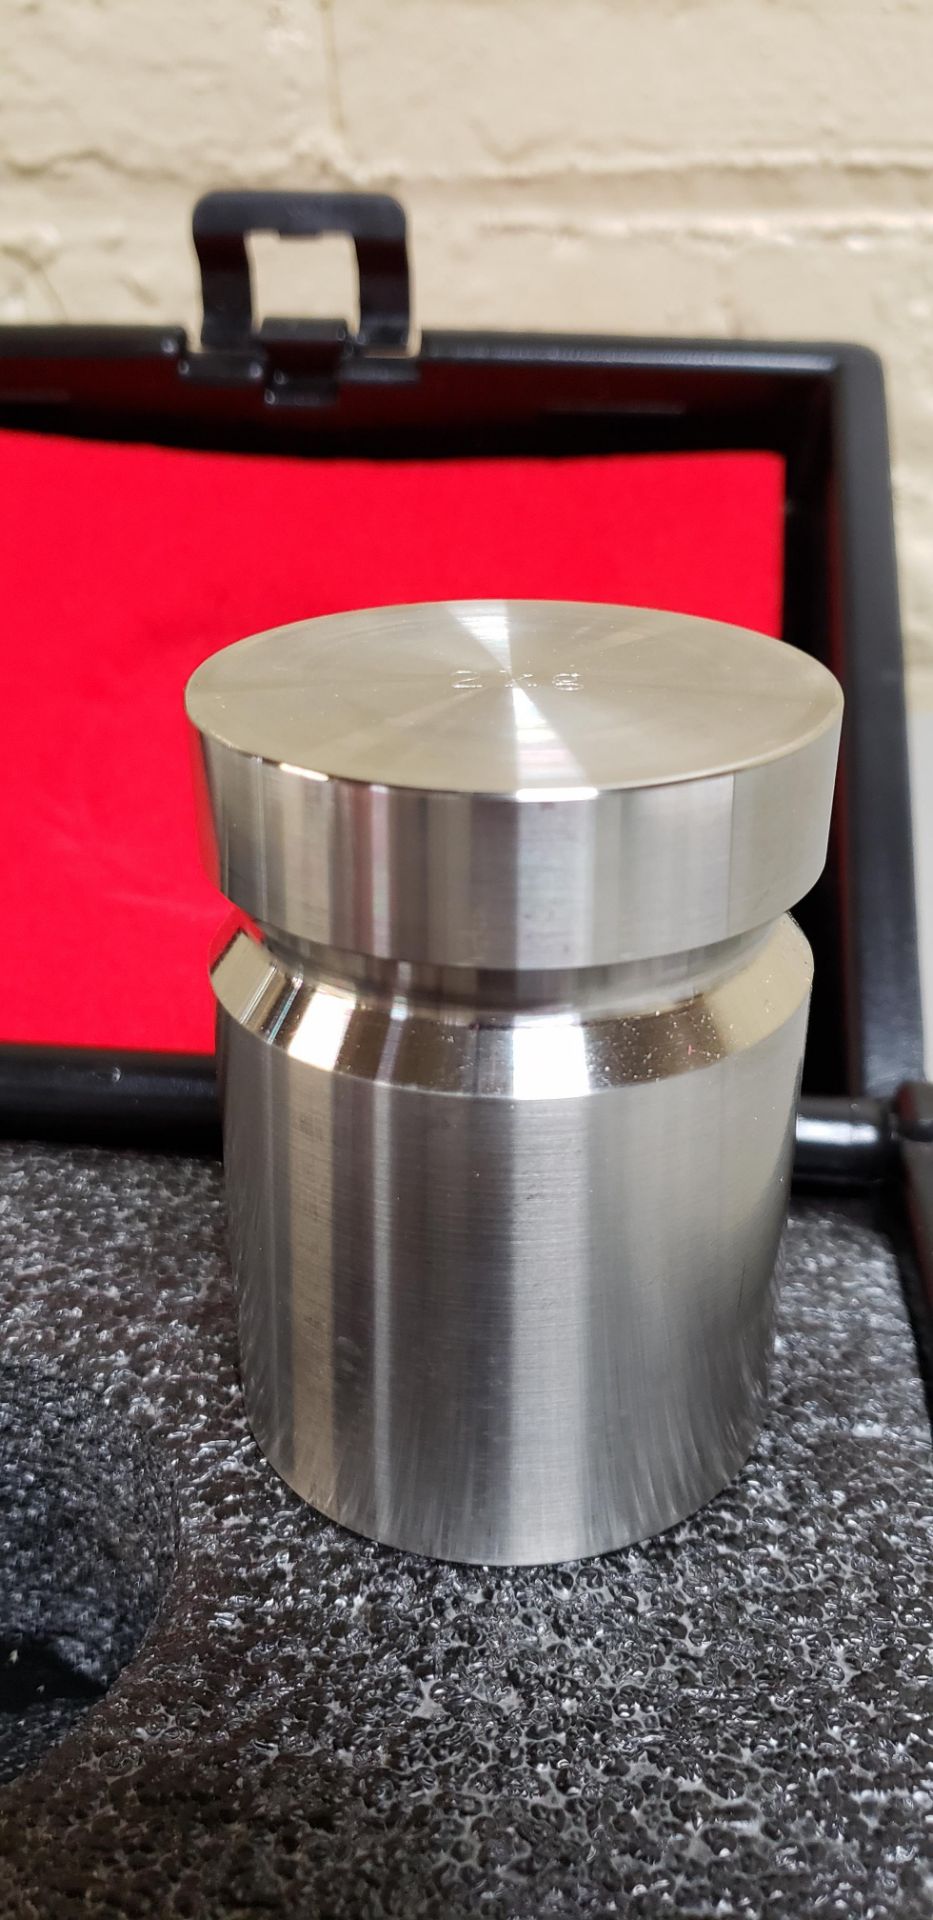 Troemner 2 Kg Calibration Weight Stainless Steel Test Weight - Image 3 of 6